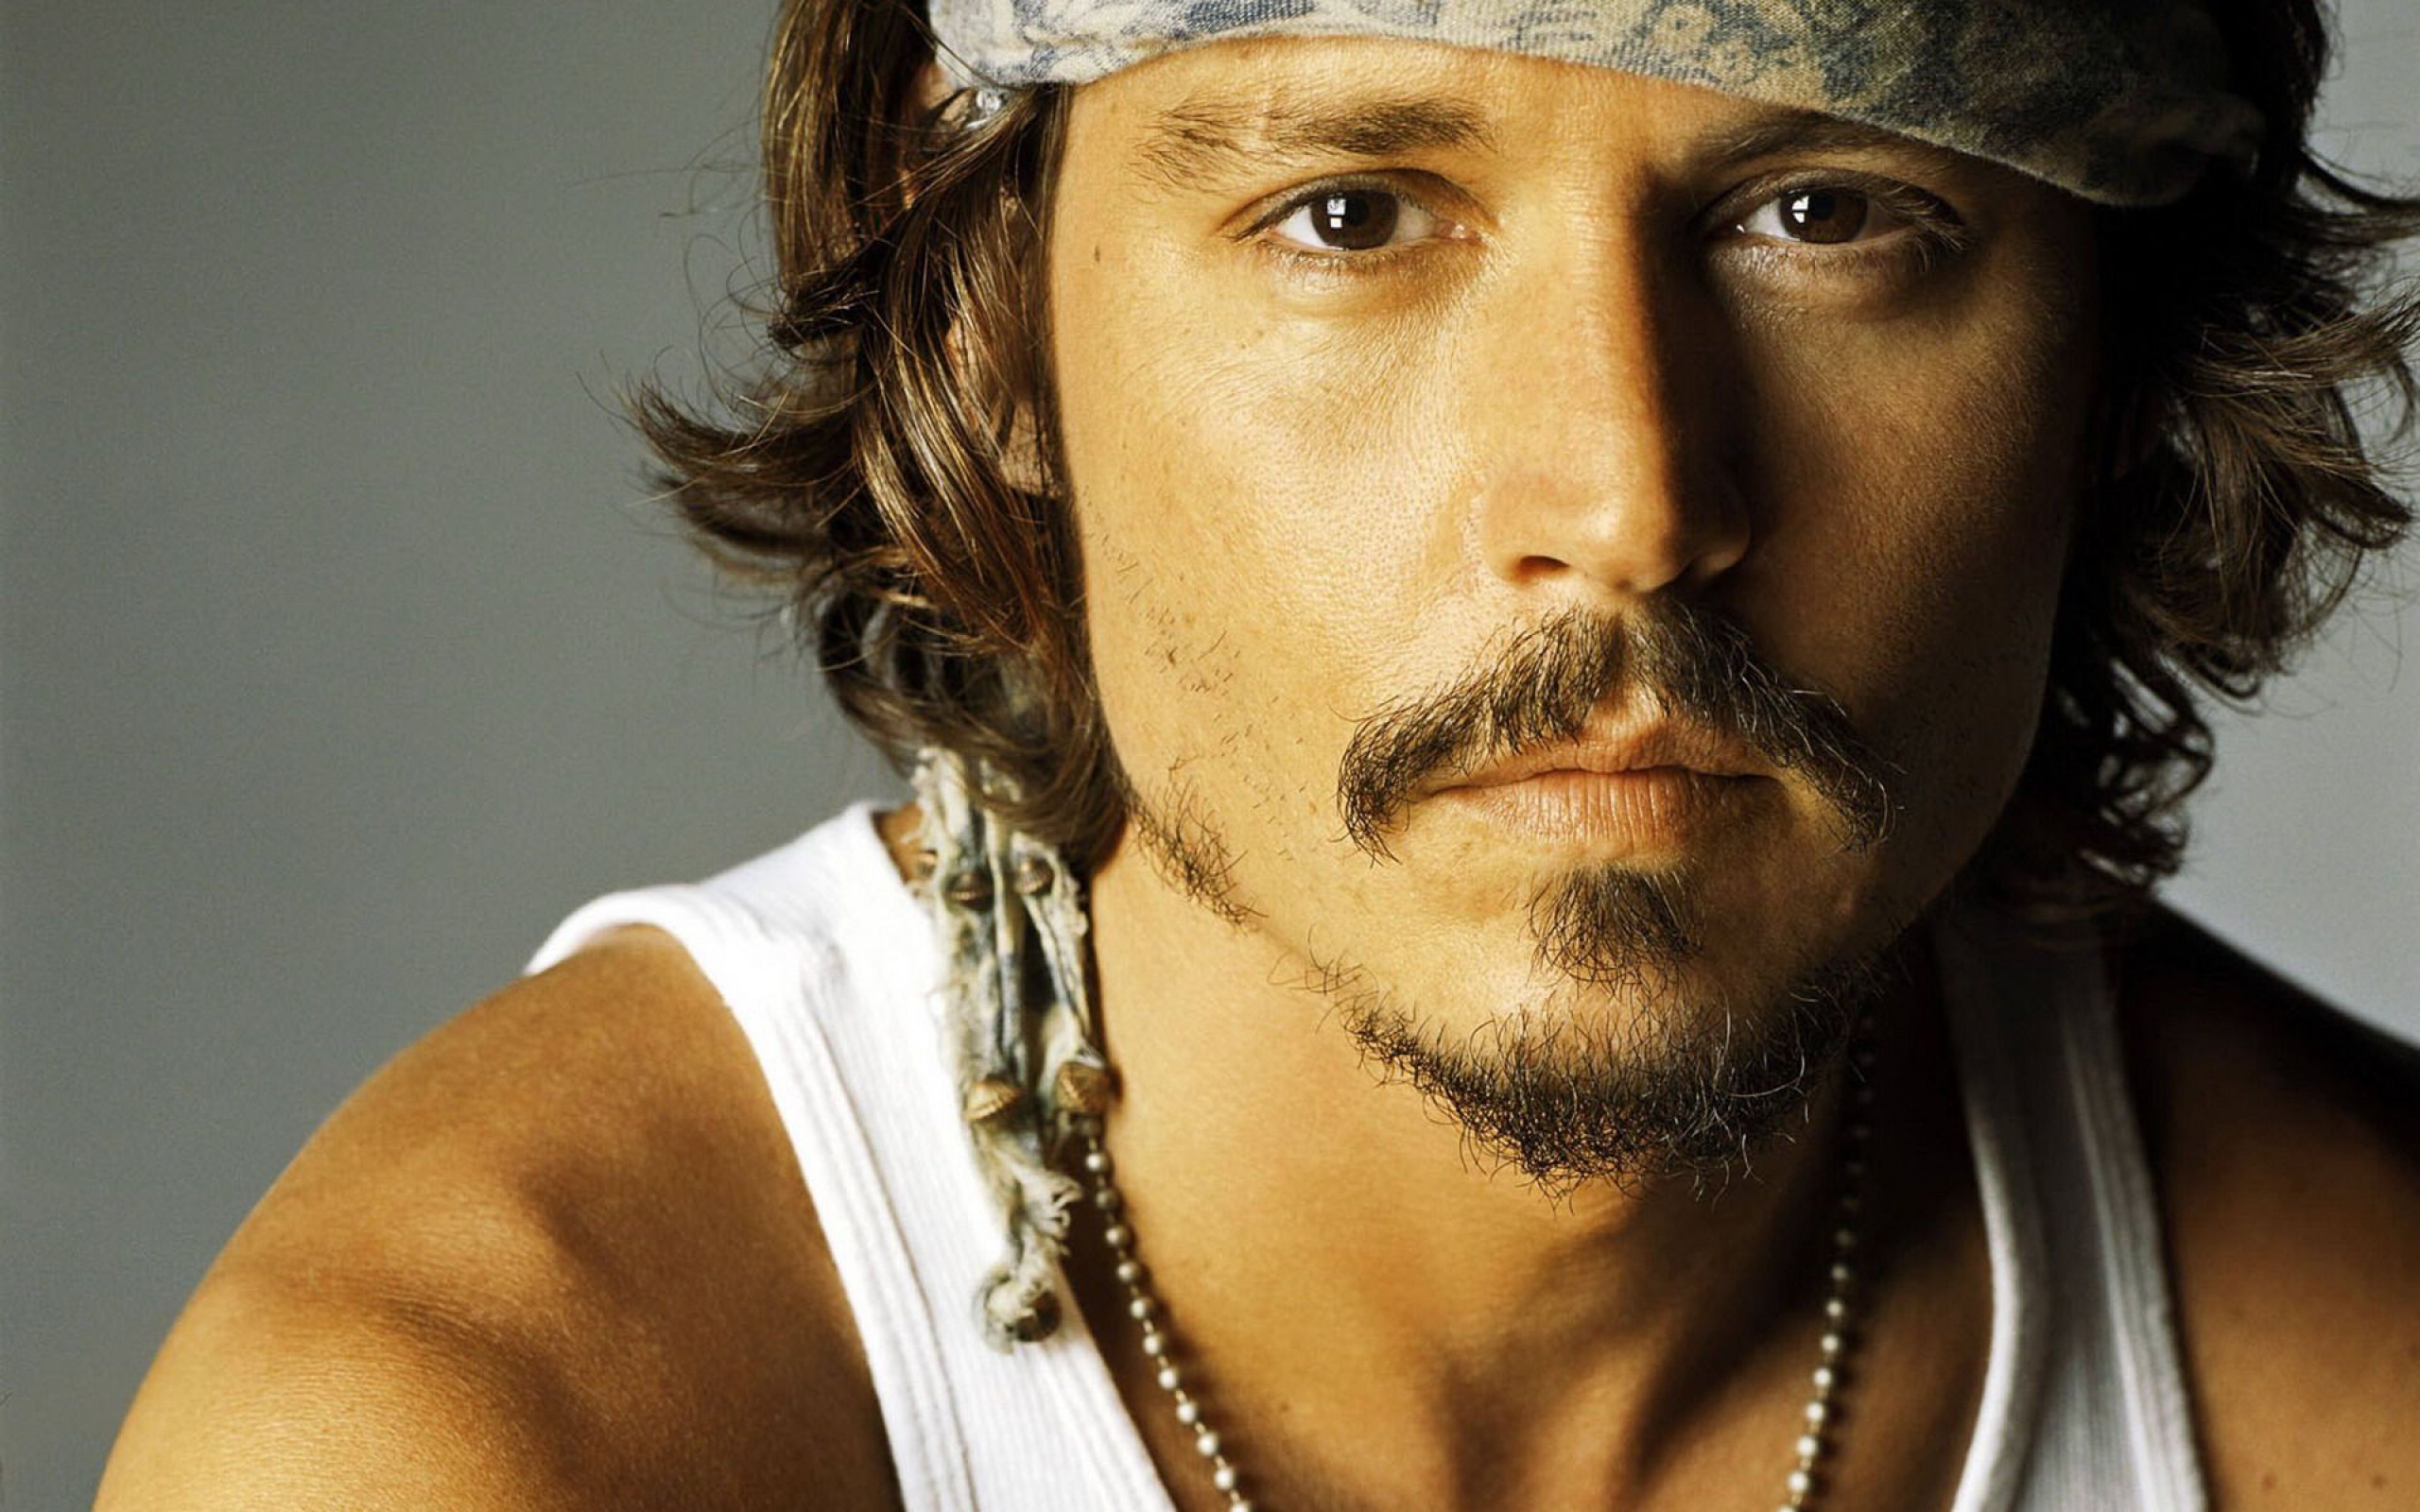 Johnny Depp Wallpapers High Resolution and Quality Download